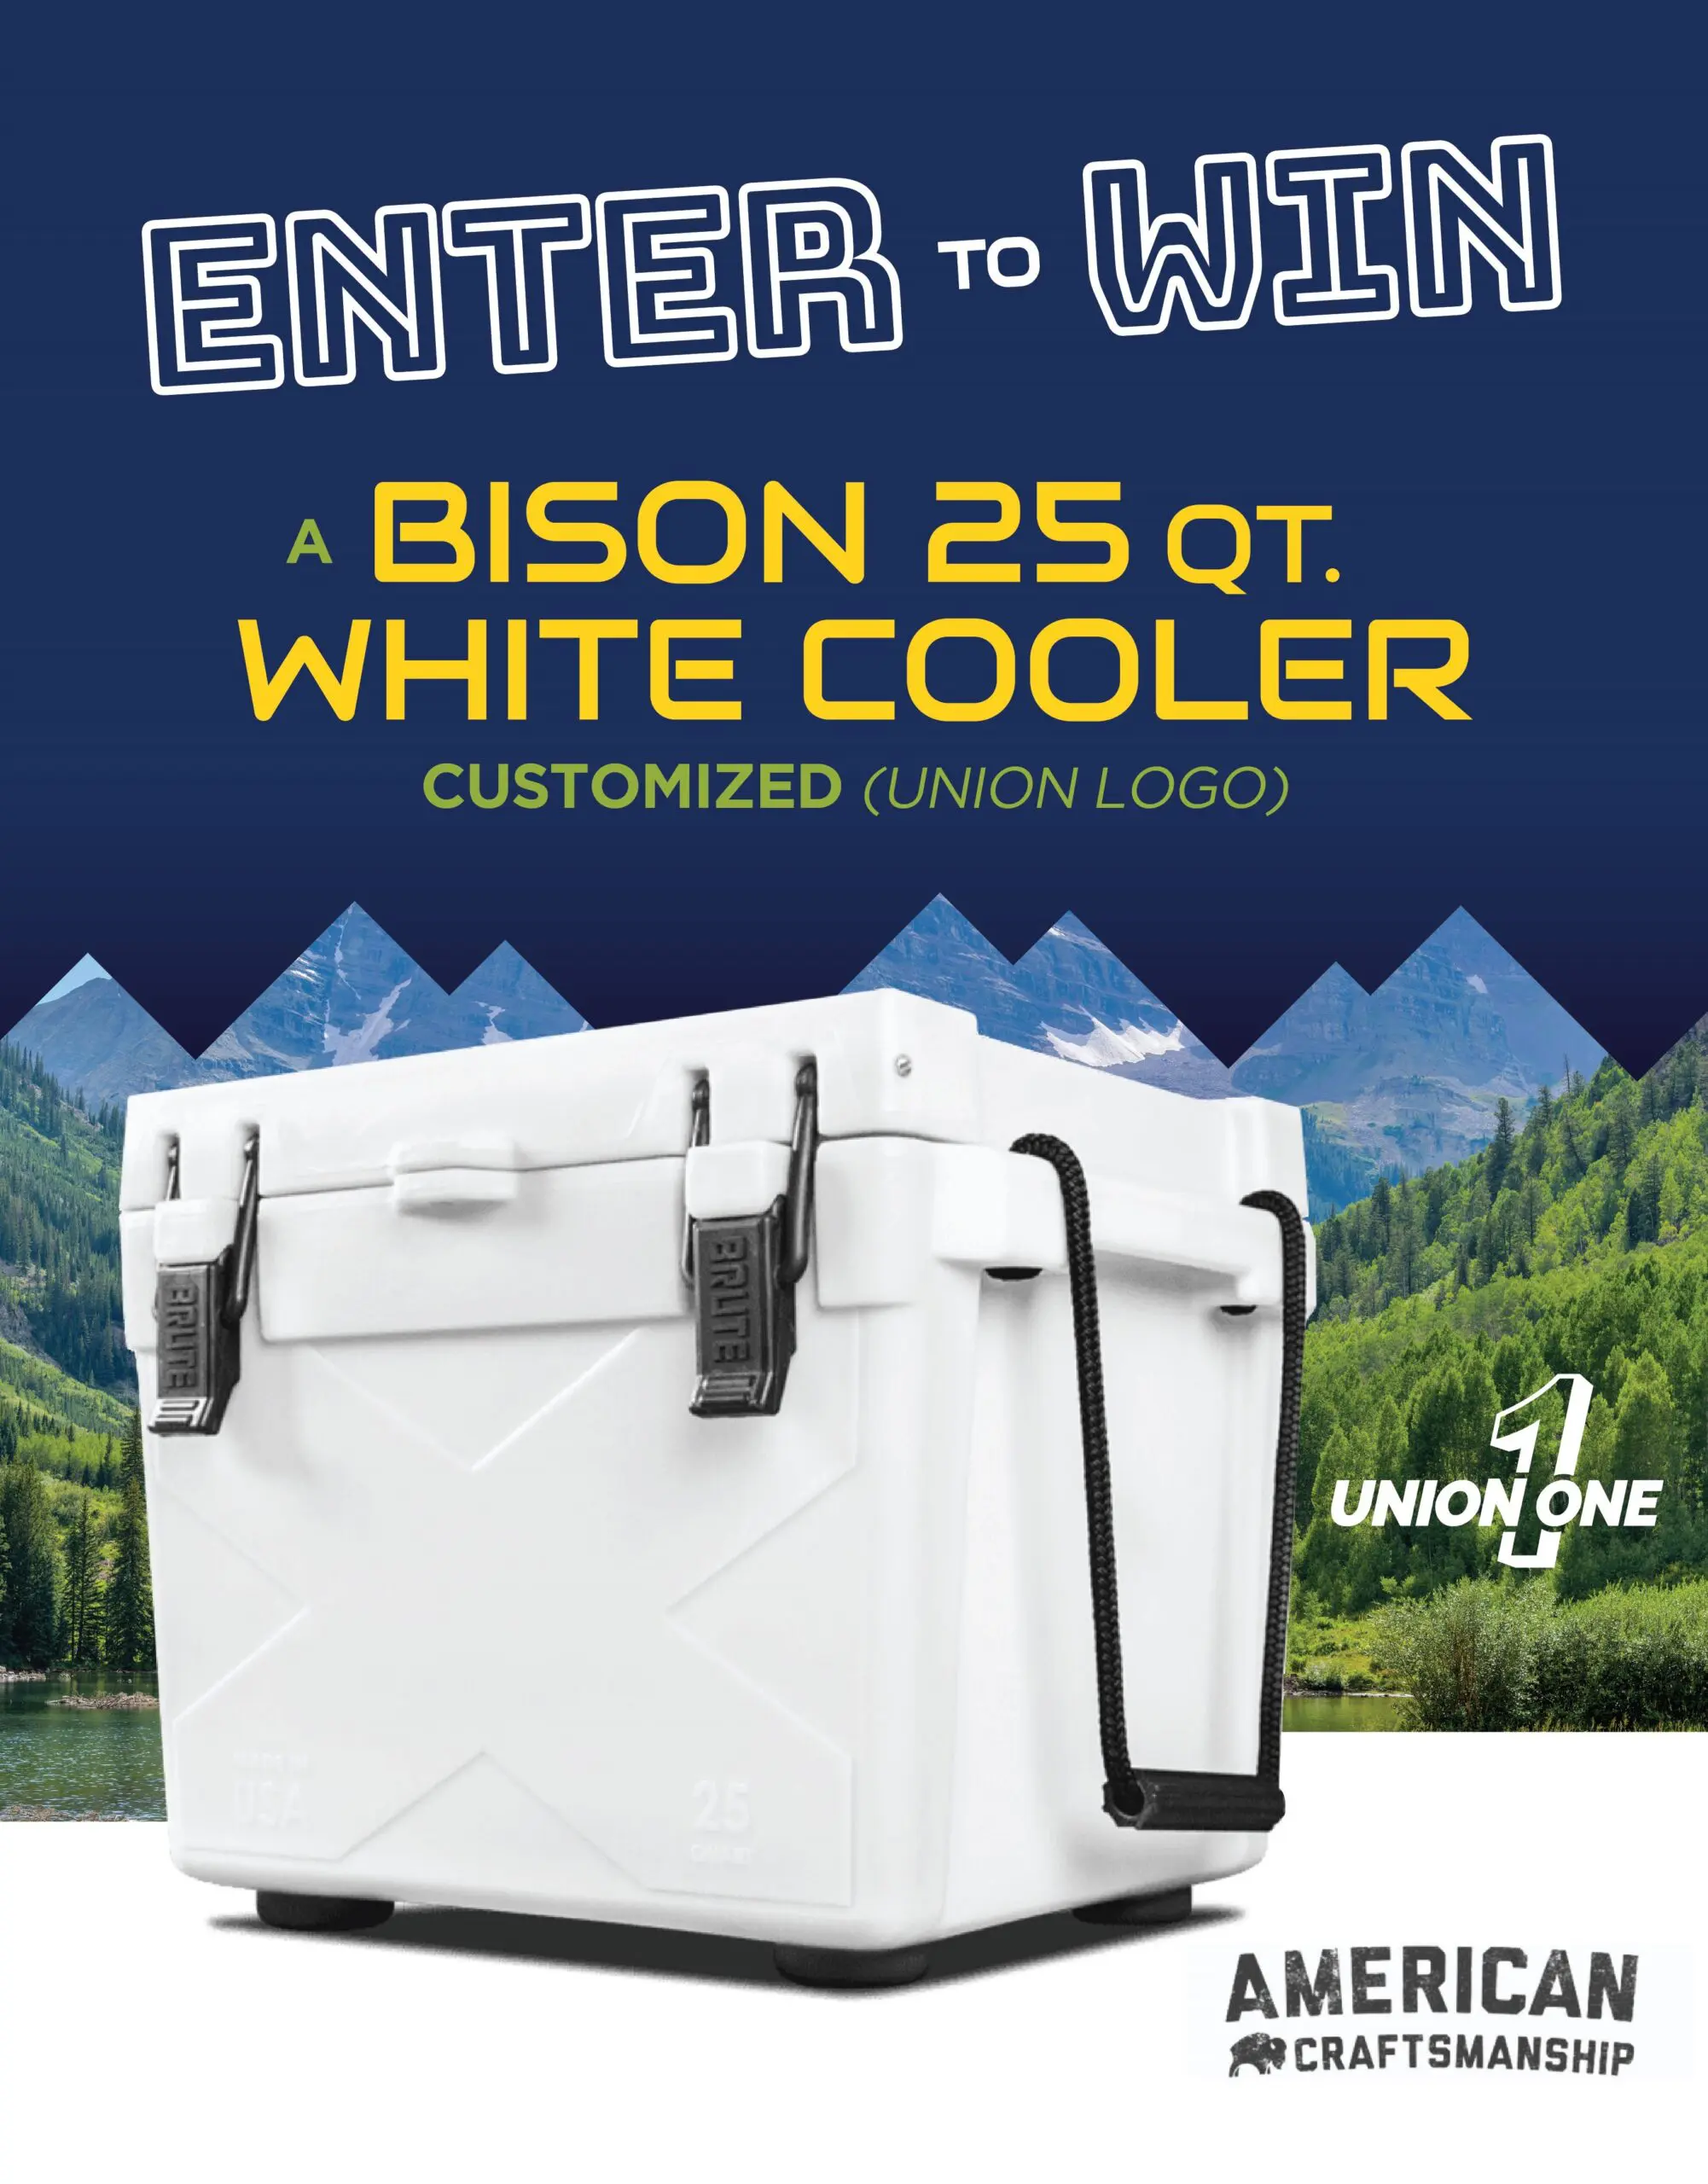 Union One Cooler Giveaway